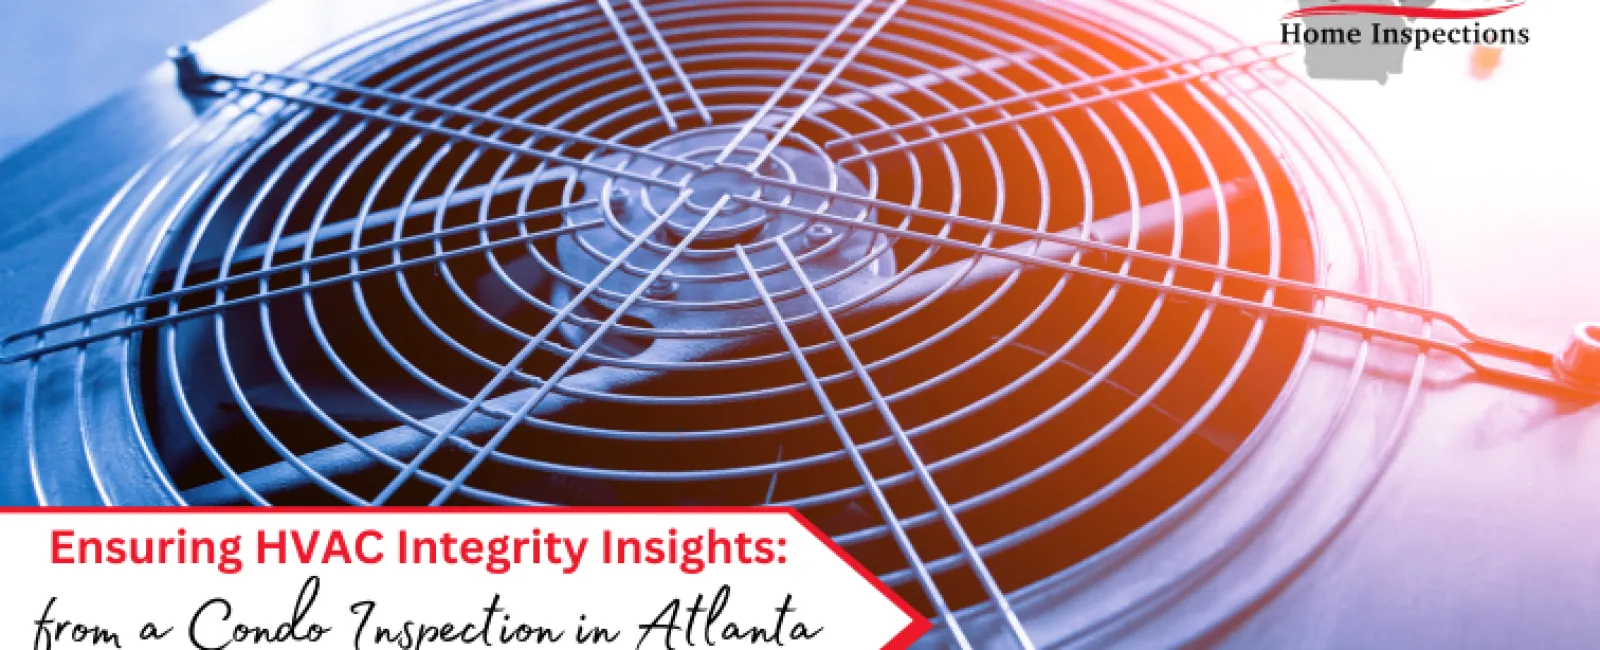 Ensuring HVAC Integrity: Insights from a Condo Inspection